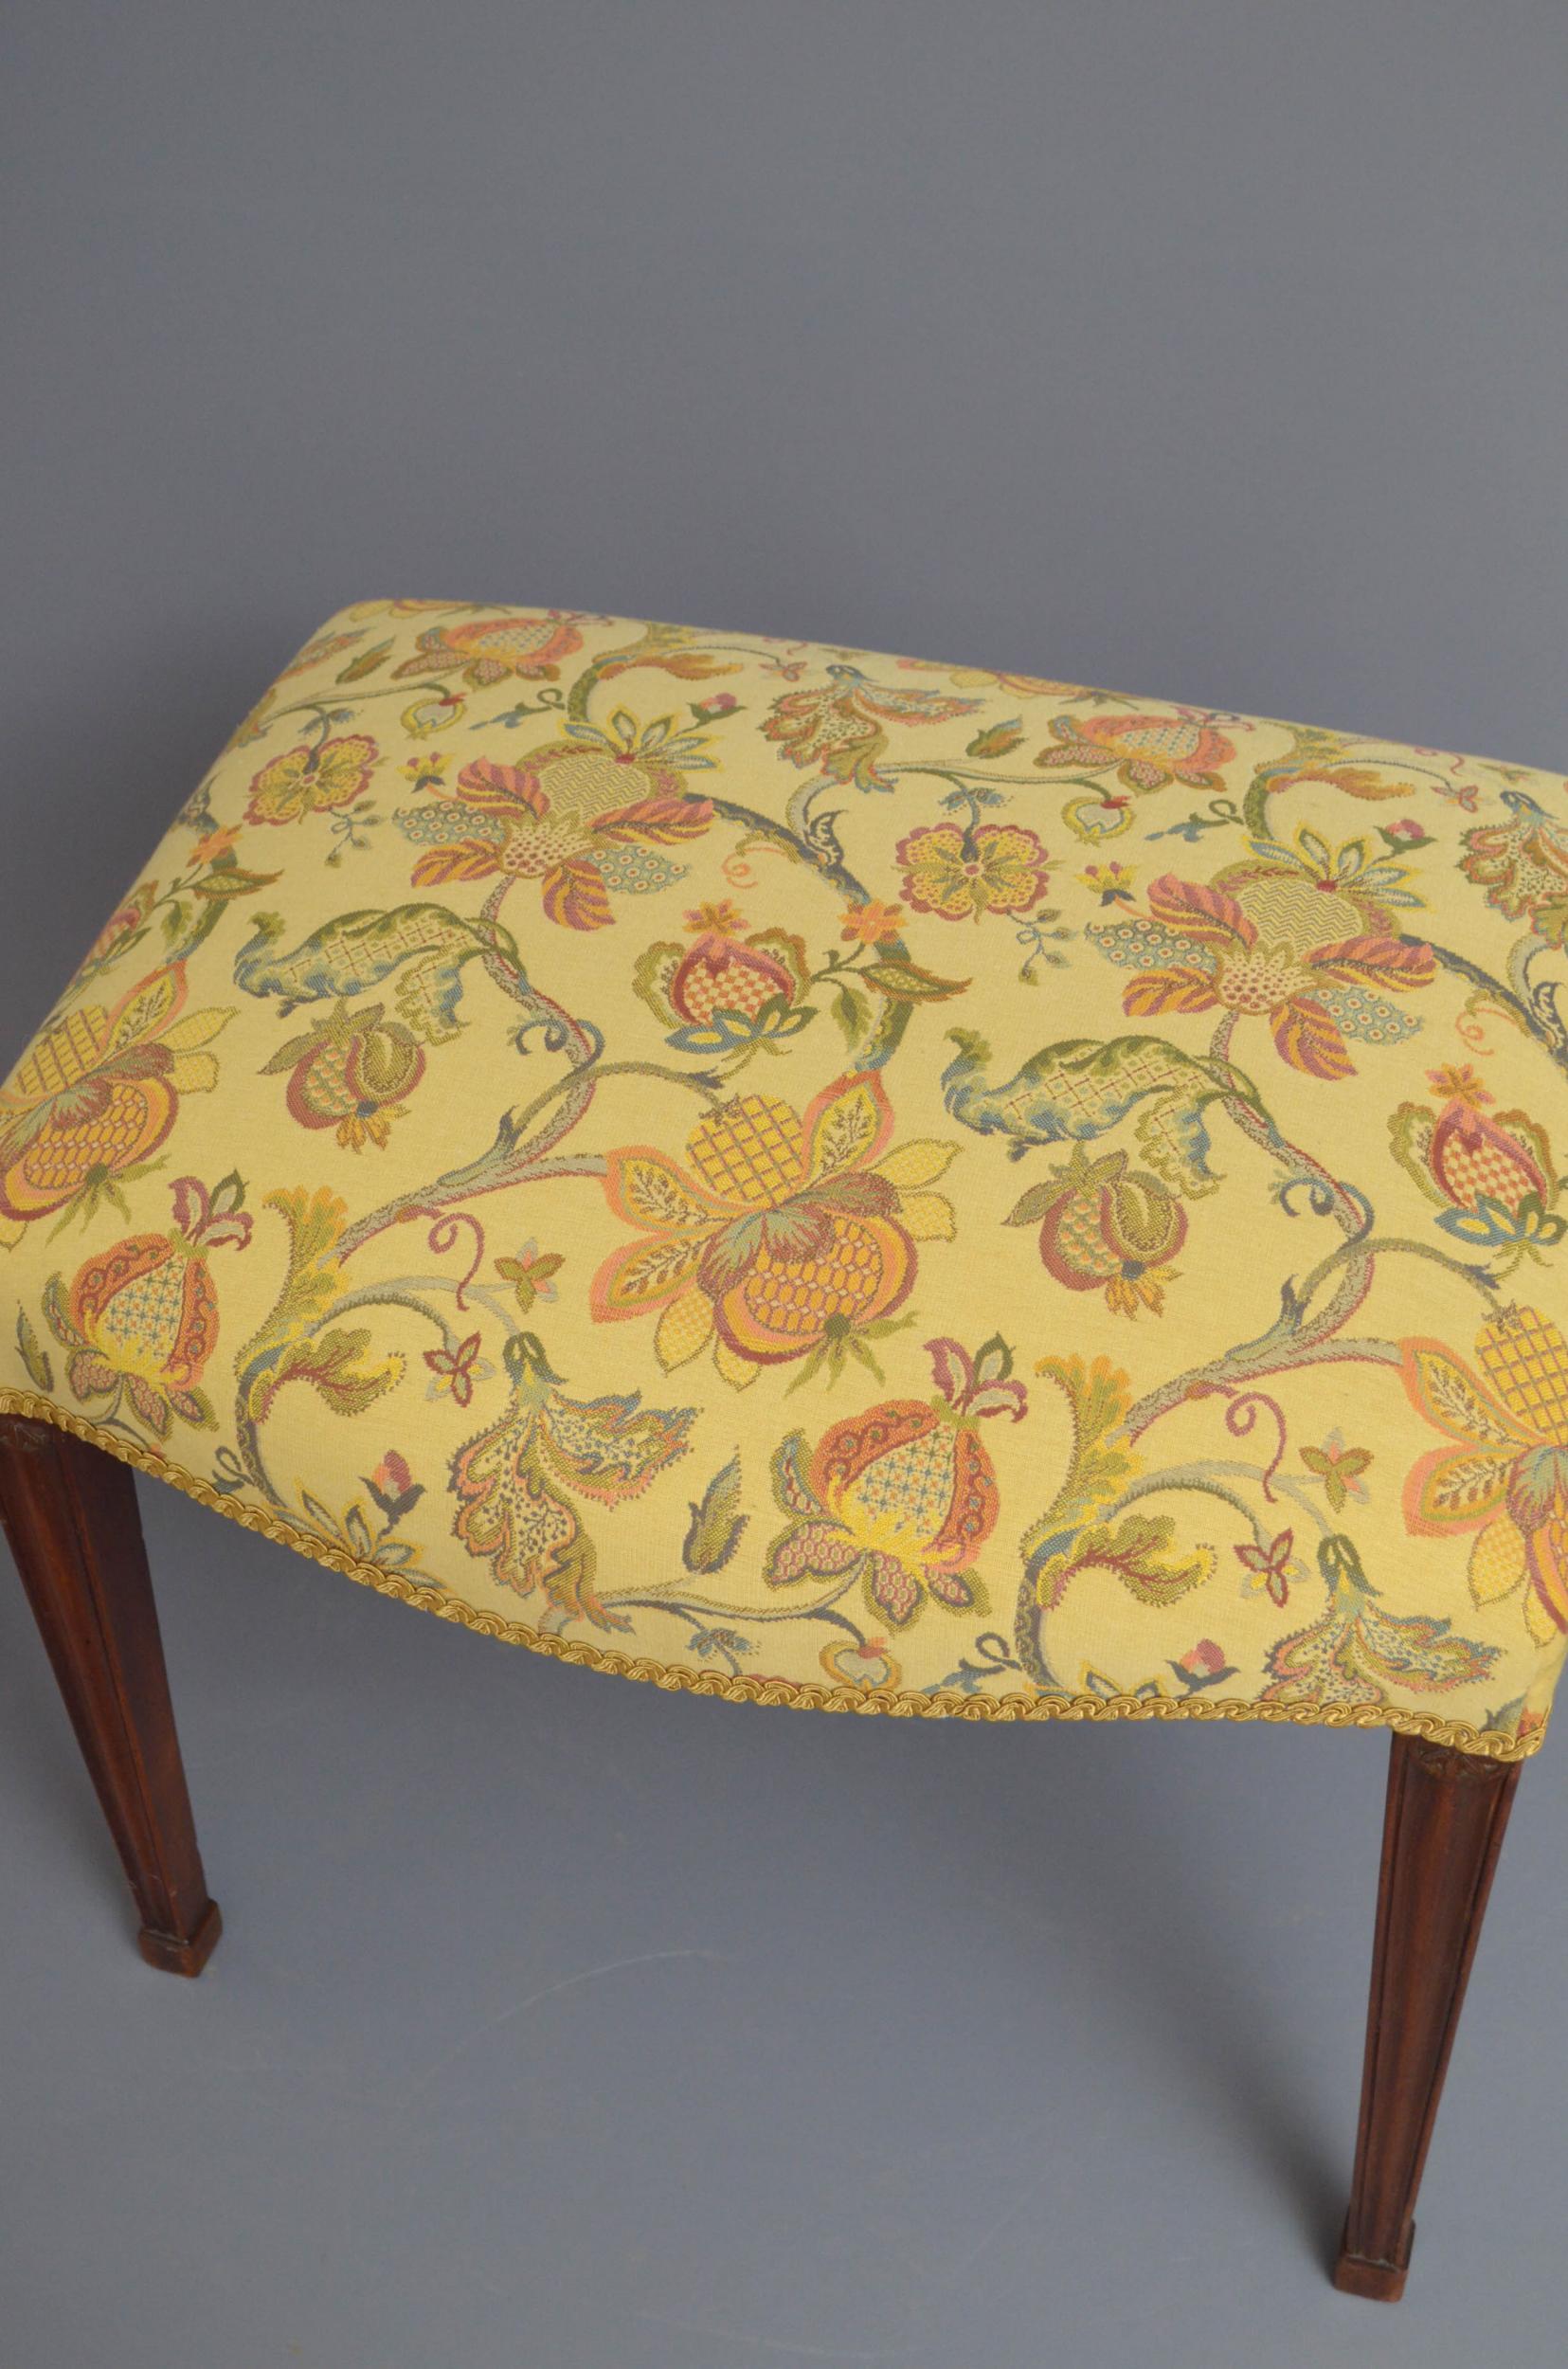 Sn5003 fine quality Hepplewhite period mahogany stool, having newly reupholstered seat covered in light yellow floral fabric, standing on carved and tapered legs. This antique stool is in wonderful home ready condition, c1770.

Measures: H 19